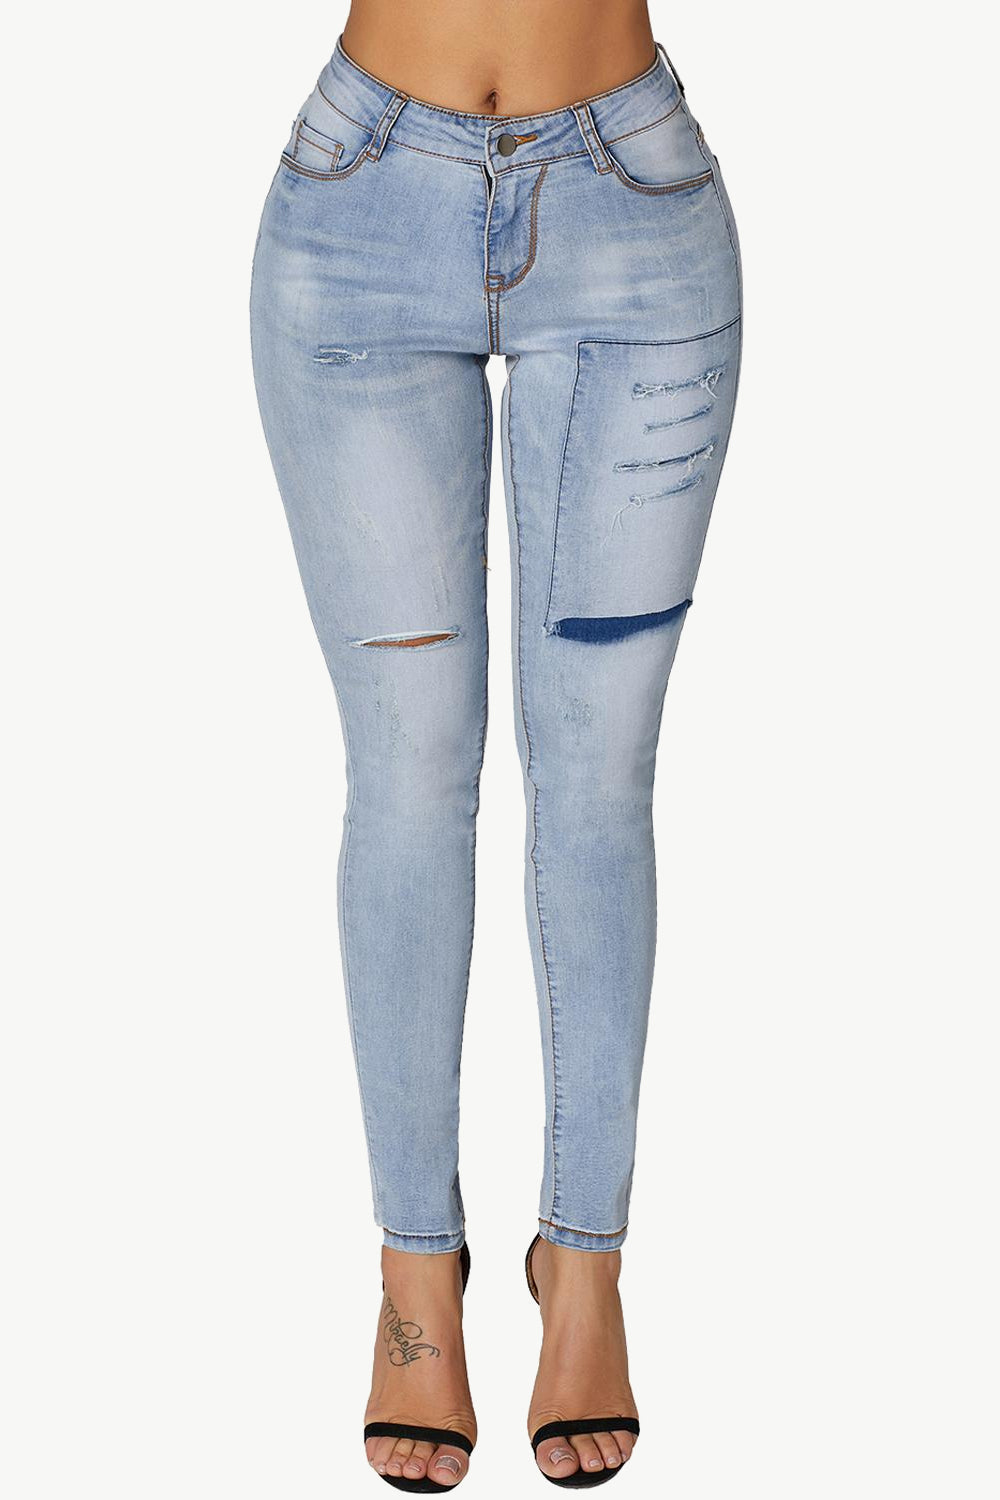 Chic Acid Wash Distressed Ripped Denim Jeans in Plus Sizes Gen U Us Products